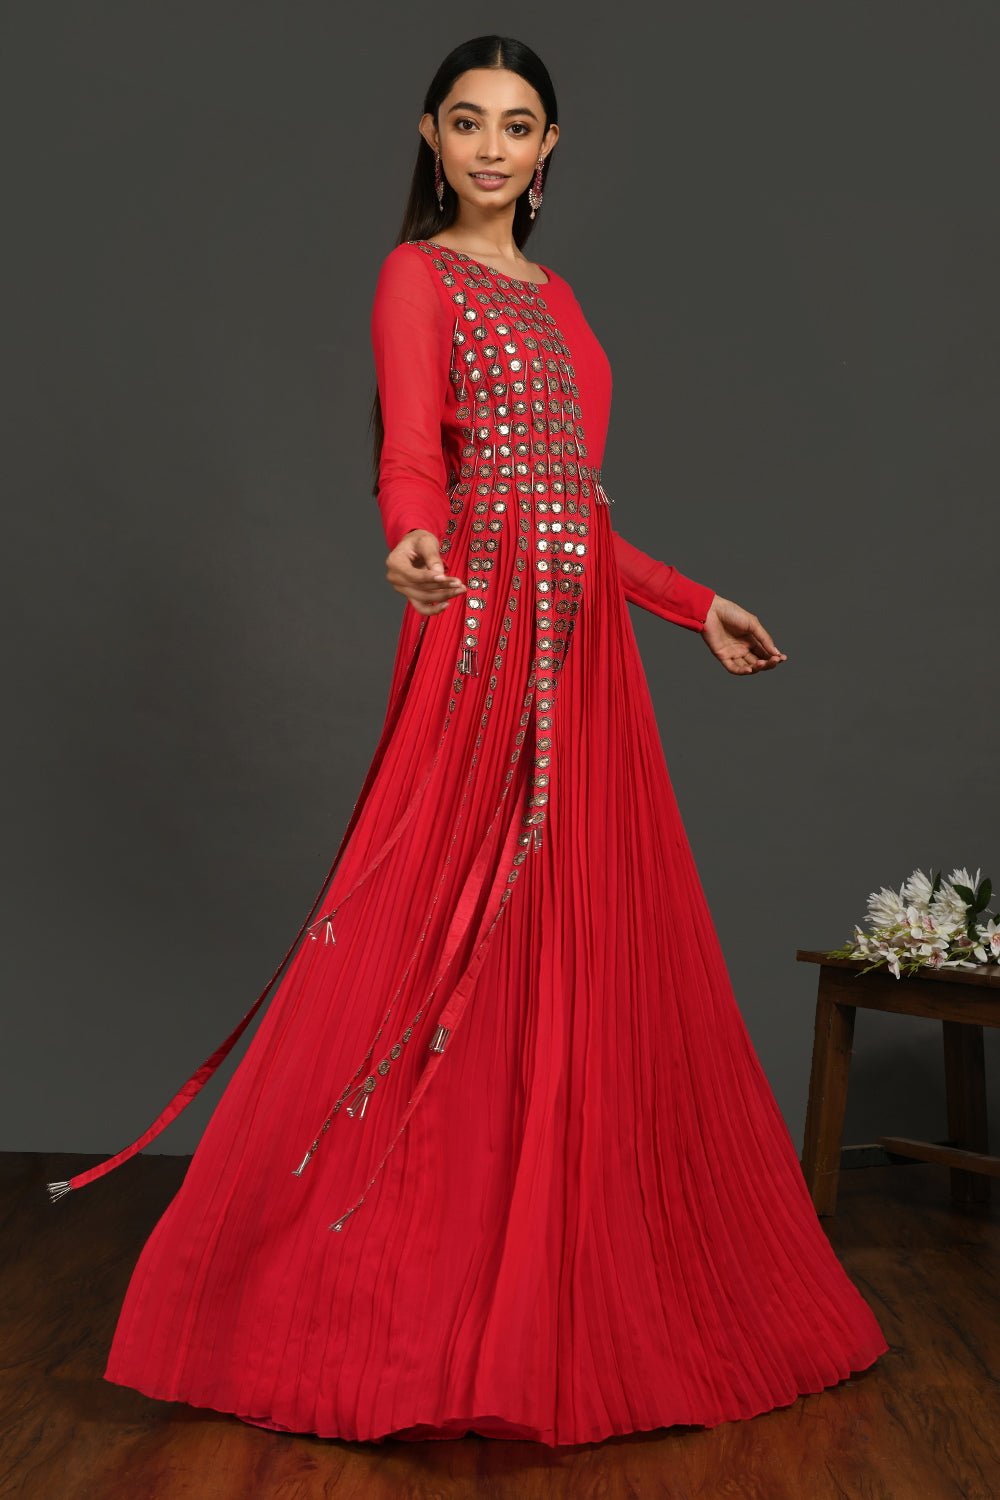 8 Styles That Work Well With Indian Evening Gowns for Wedding Reception |  Wedding evening gown, Indian evening gown, Indian bridal outfits